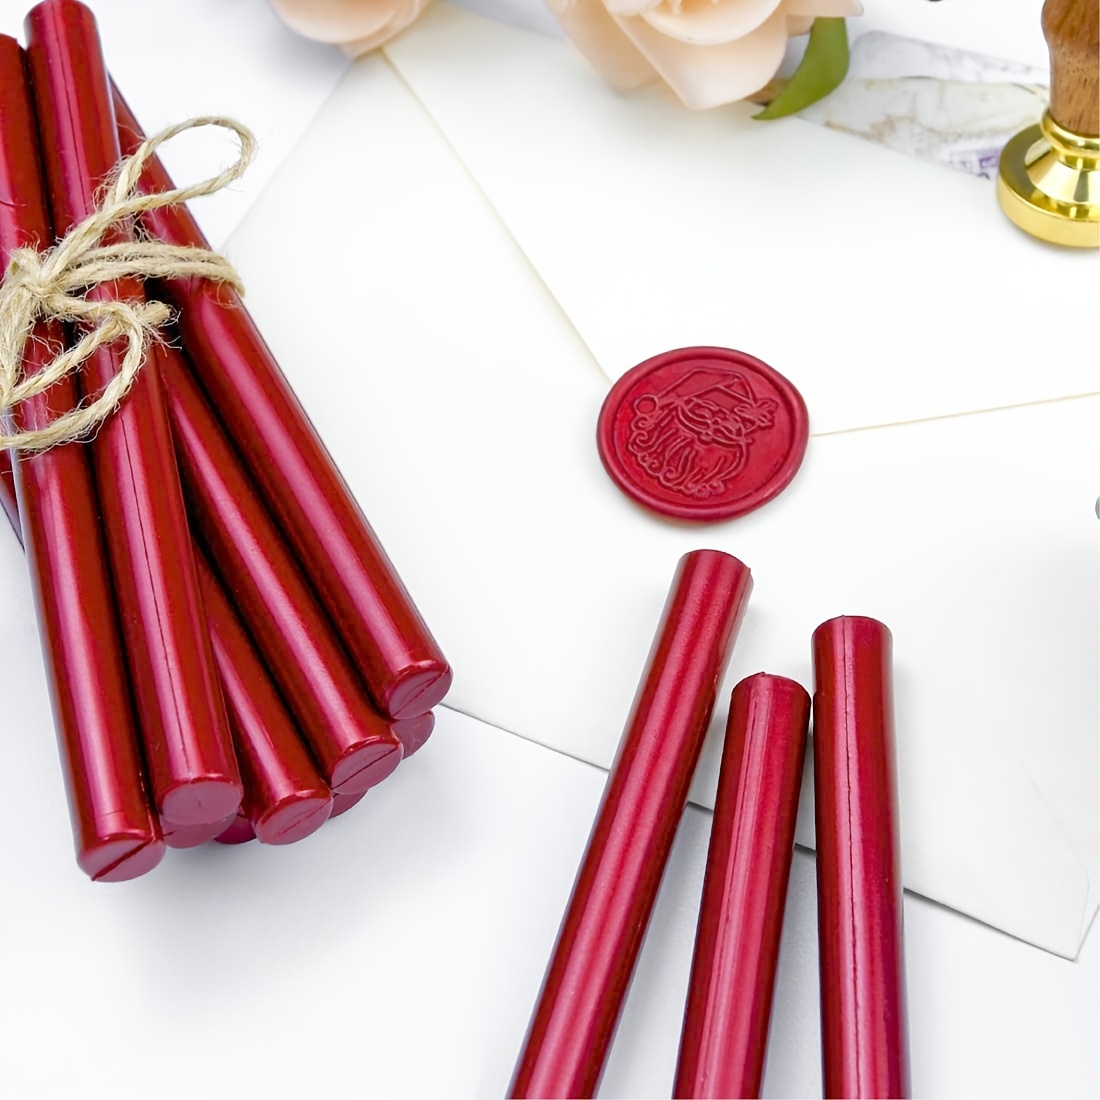  Apricot Pink Wax Sticks STAMPMASTER 20pcs Mini Wax Seal Sticks  Glue Gun Sealing Wax Sticks for Wedding Invitations Letter Envelope Cards  Crafts Christmas Package Decoration : Arts, Crafts & Sewing